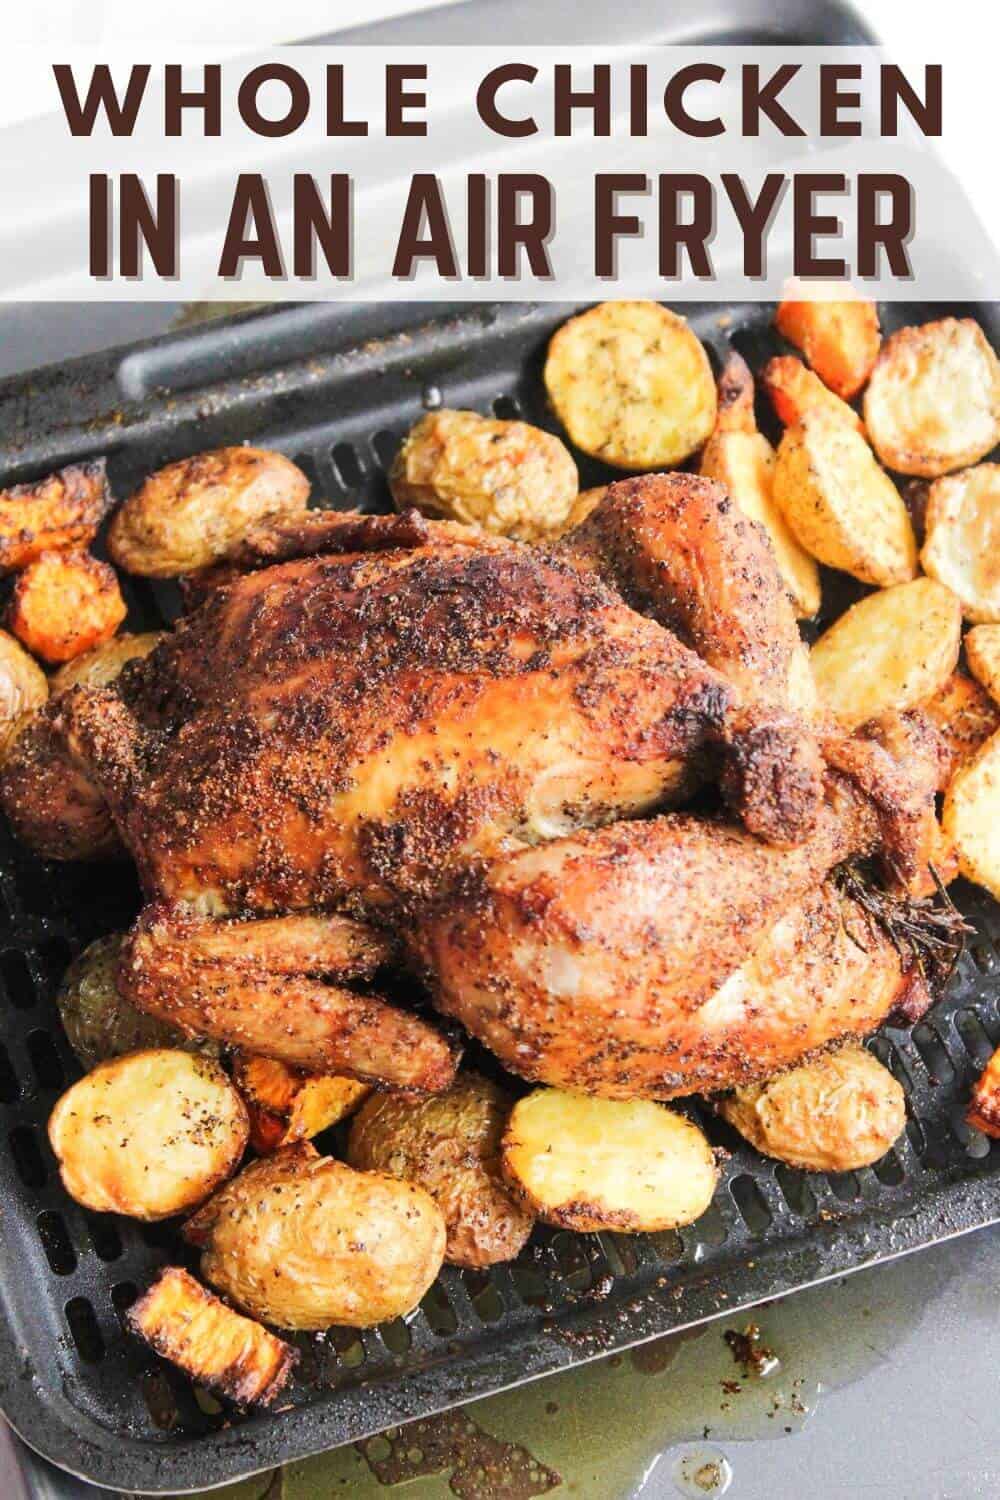 Experience the crispy perfection of a whole chicken cooked to perfection using an air fryer. Enjoy tender and juicy meat surrounded by a delightful crunch, all achieved effortlessly with the convenience of an air fry